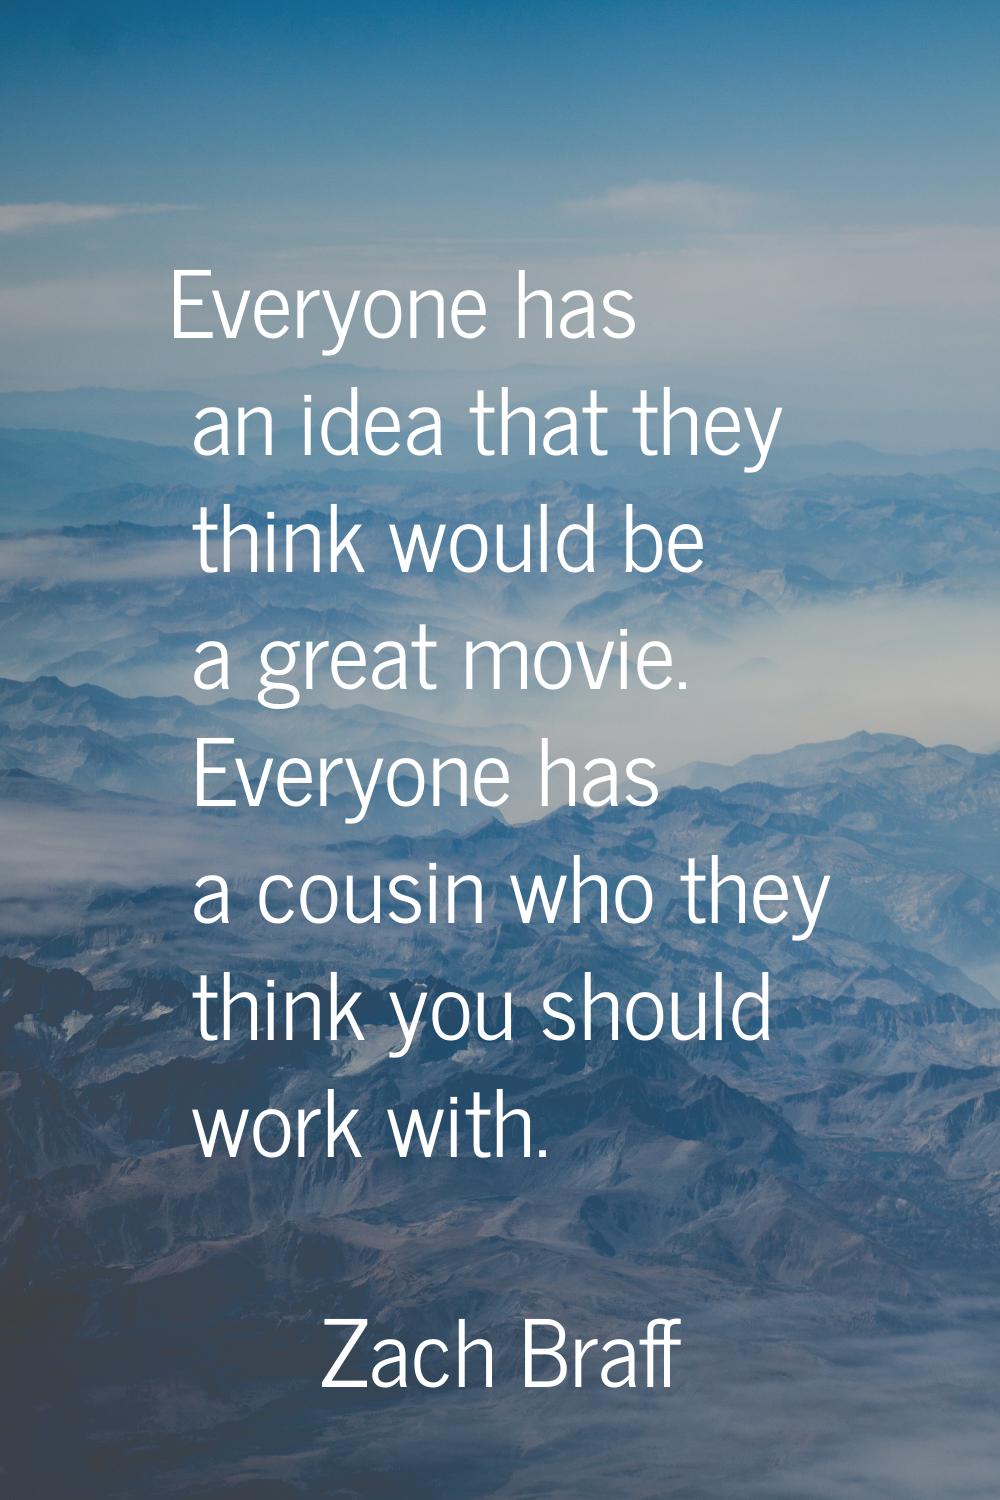 Everyone has an idea that they think would be a great movie. Everyone has a cousin who they think y